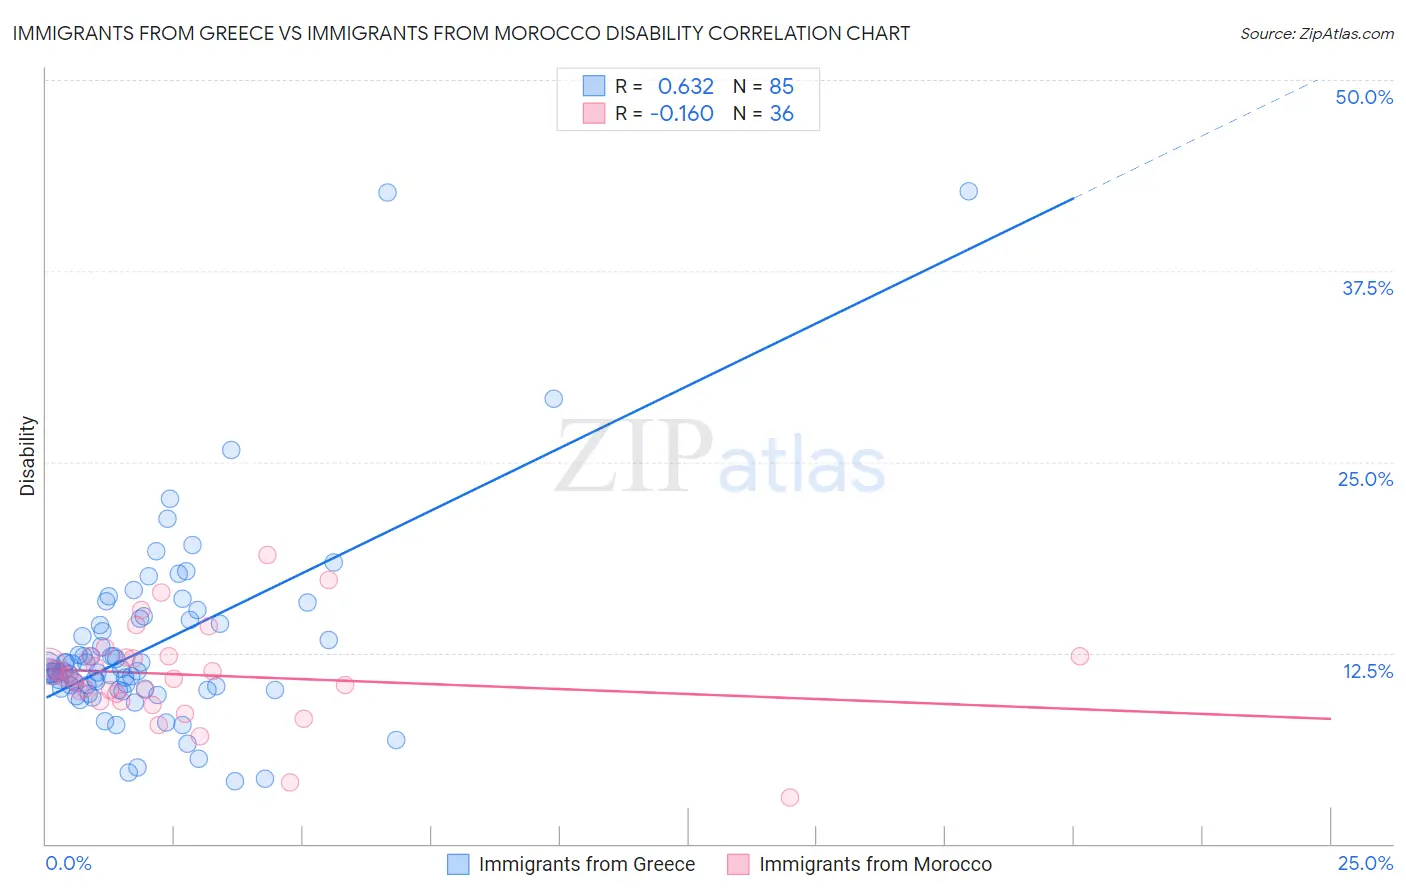 Immigrants from Greece vs Immigrants from Morocco Disability